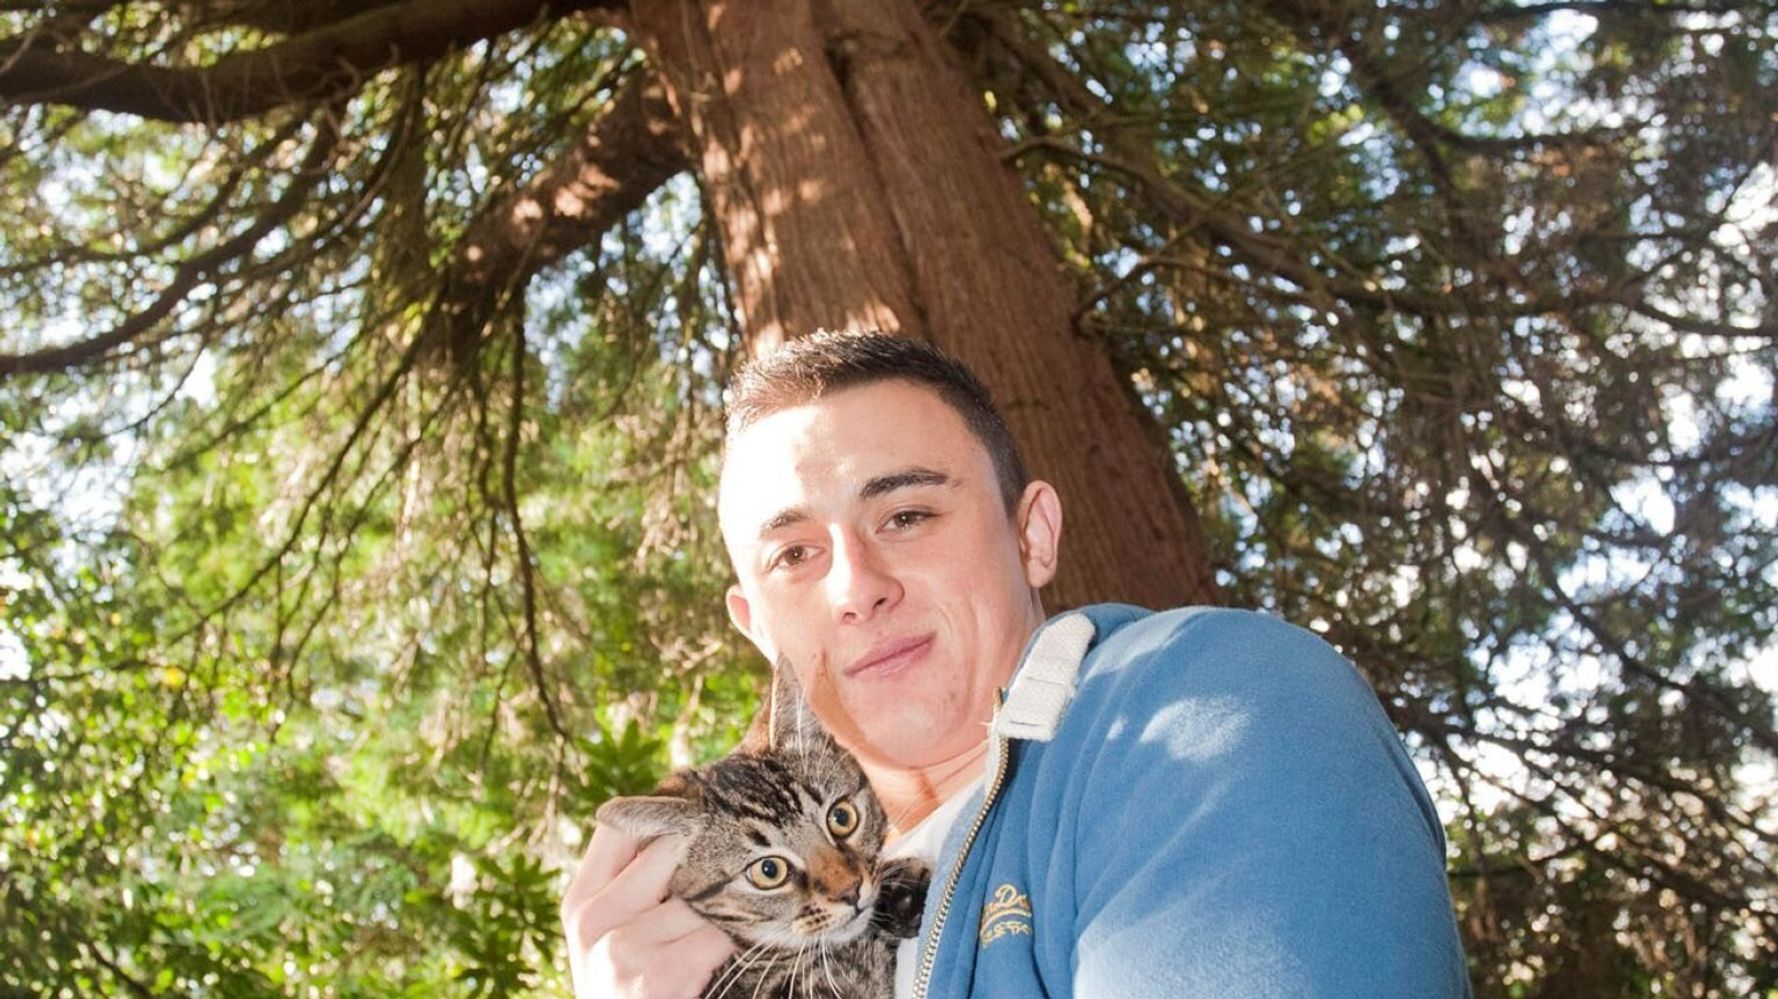 Care Home Worker Nathan Kent Gets Stuck In Tree While Rescuing Cat